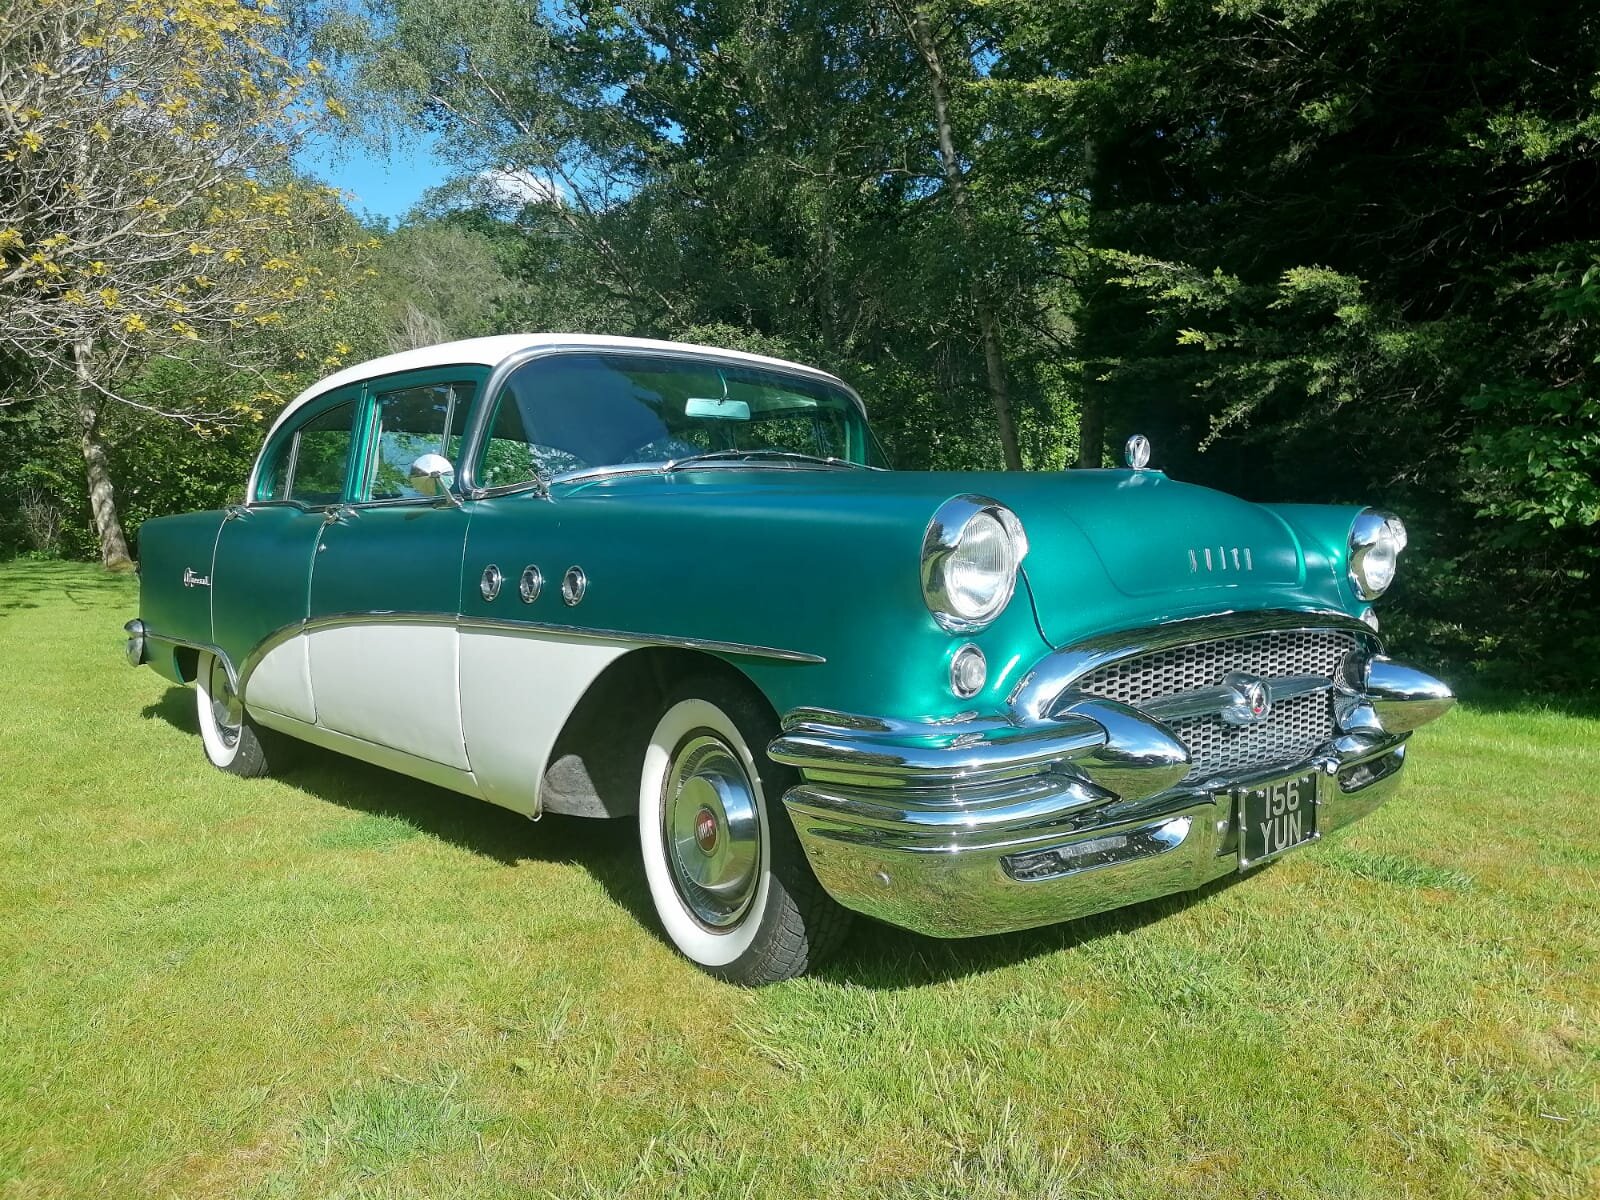 1955 Buick Special (Green)